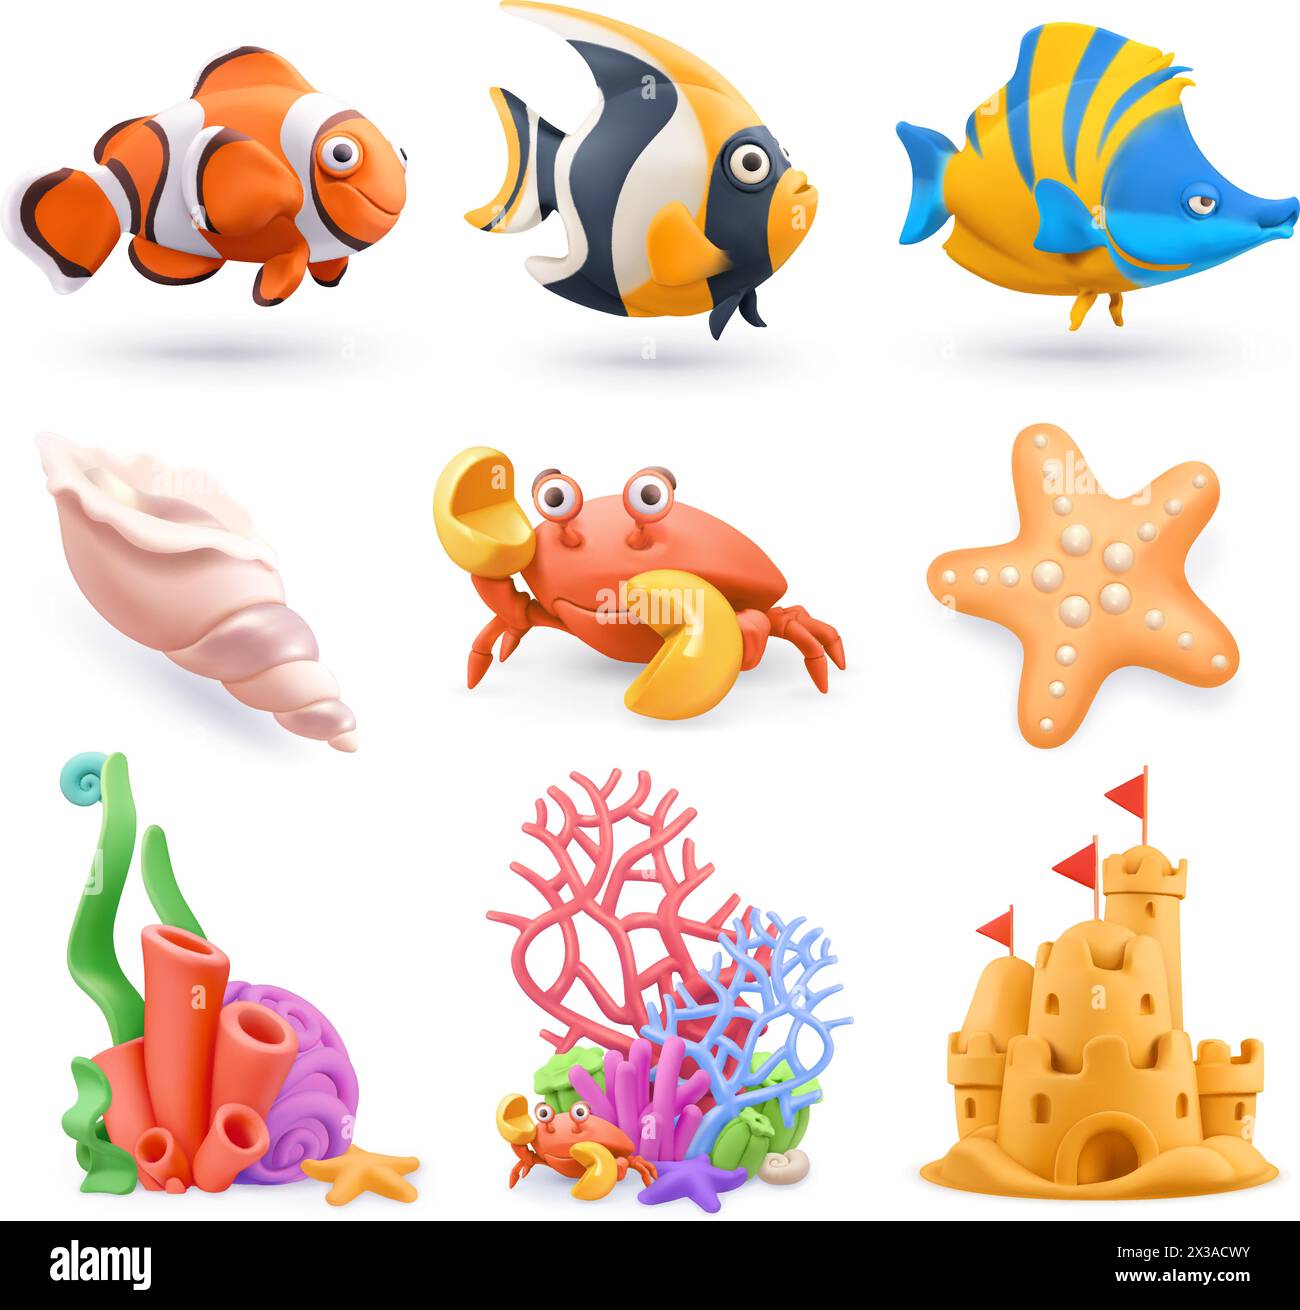 Underwater world cartoon icon set. Tropical fish, corals, sand castle, starfish, shell, crab. 3d vector plasticine art objects Stock Vector